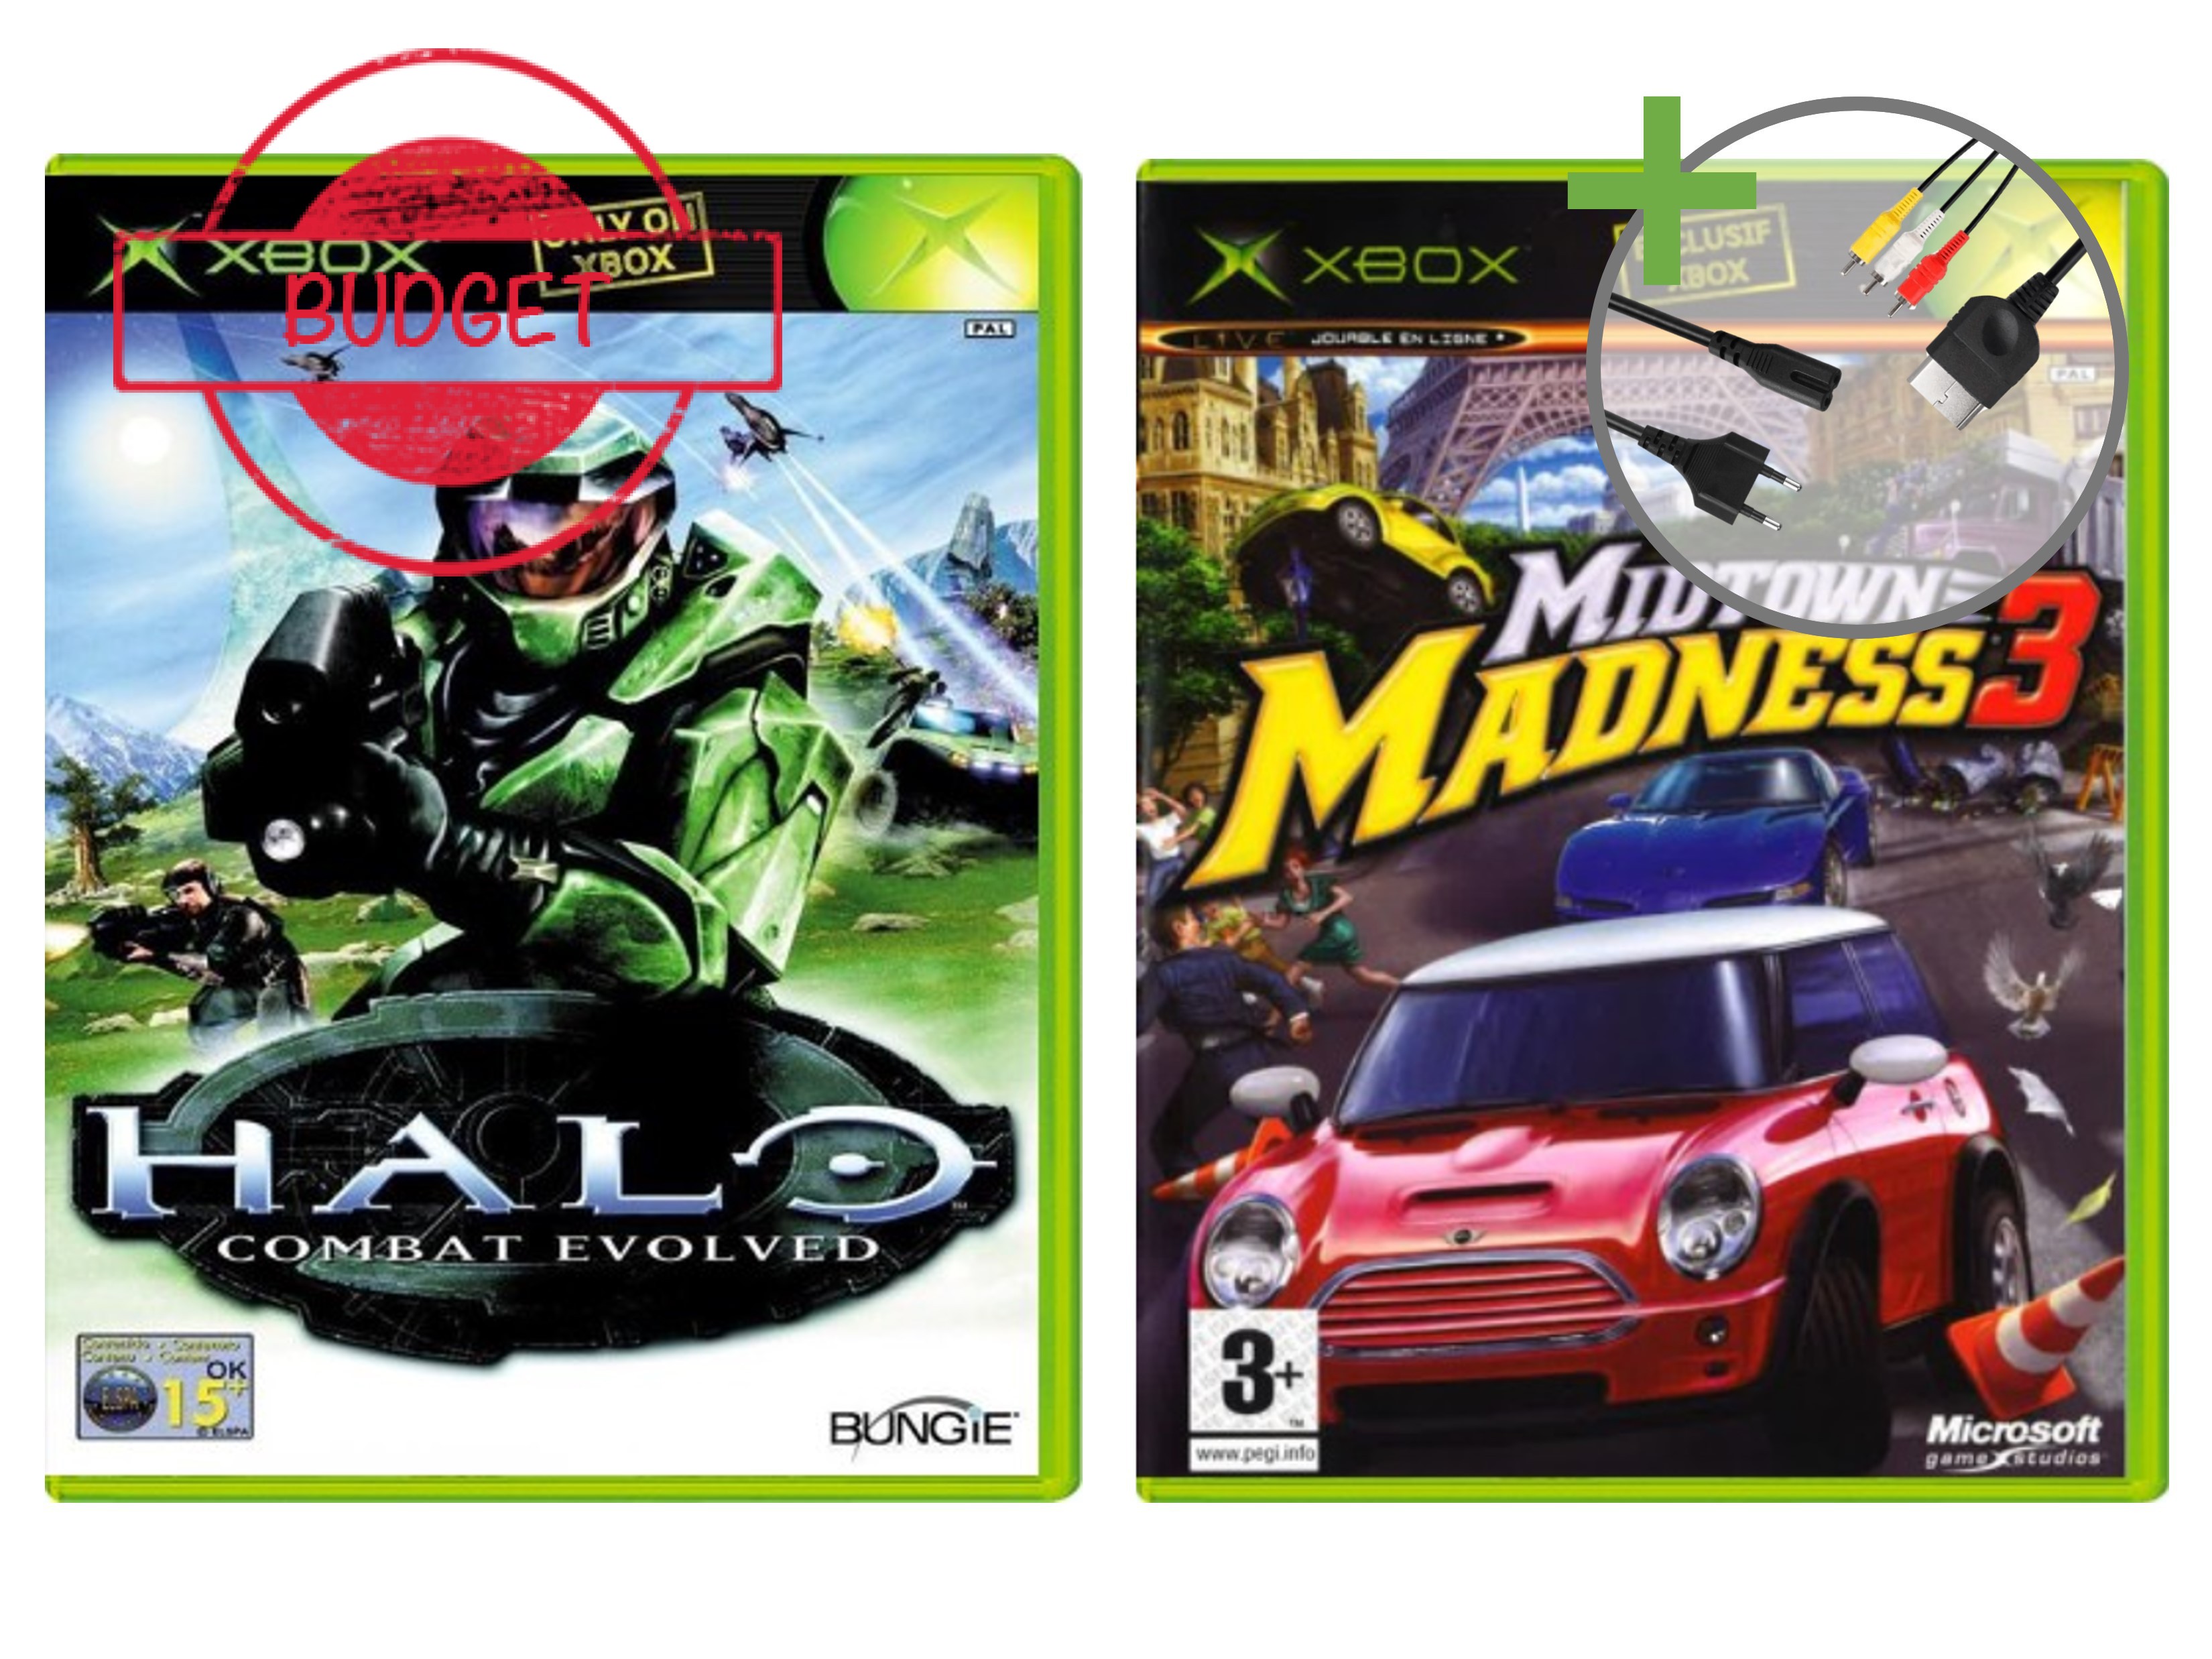 Microsoft Xbox Classic Starter Pack - Halo and Midtown Madness 3 Edition - Budget - Xbox Original Hardware - 4